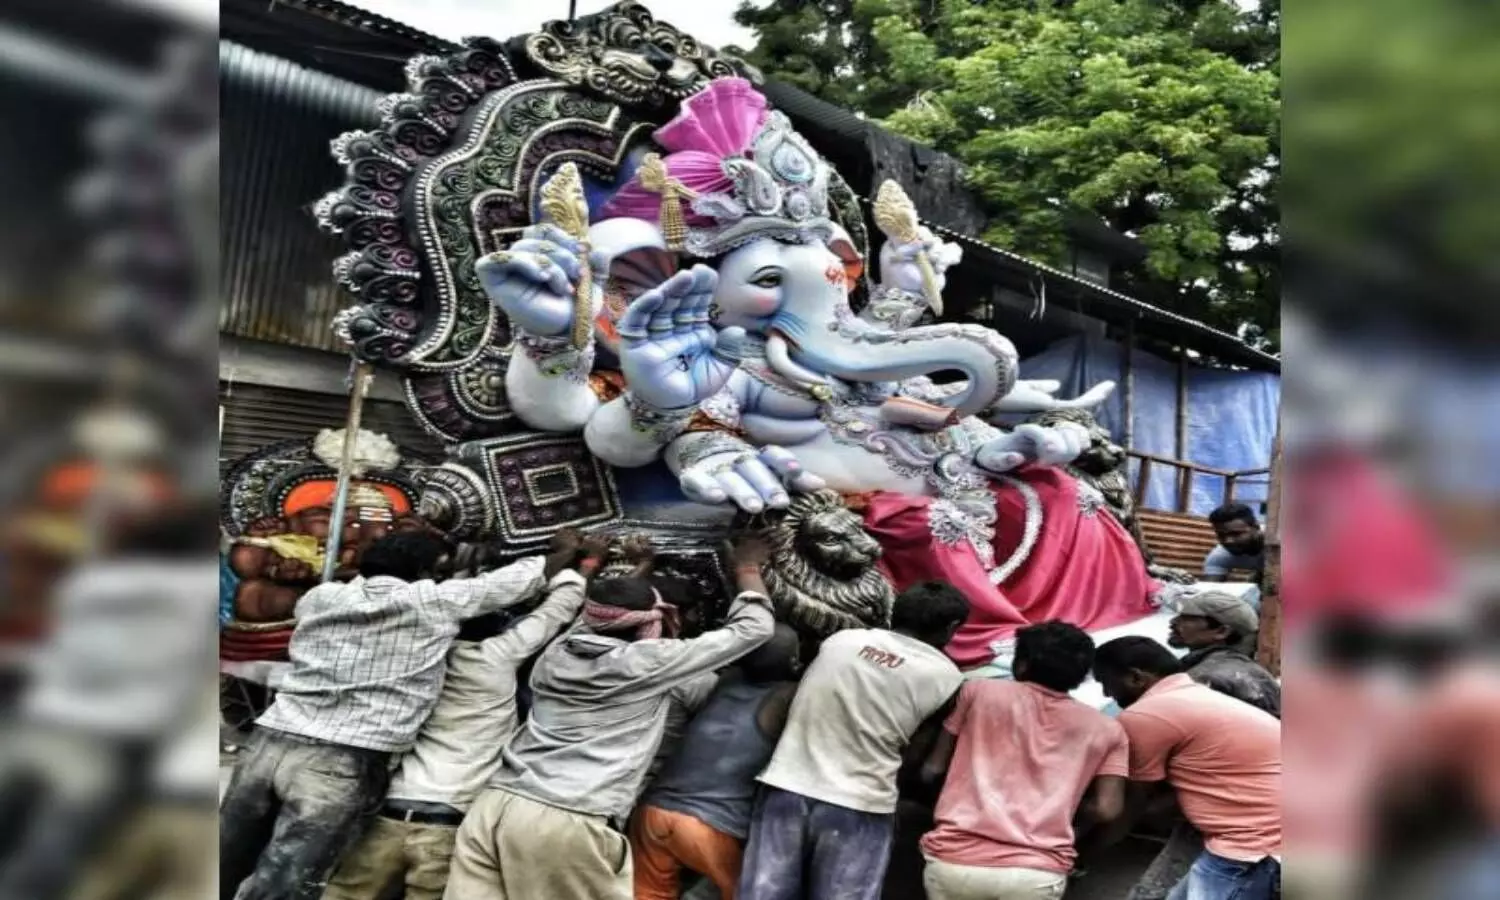 Ganesh Festival: All you want to know about police clearances and processions in Hyderabad